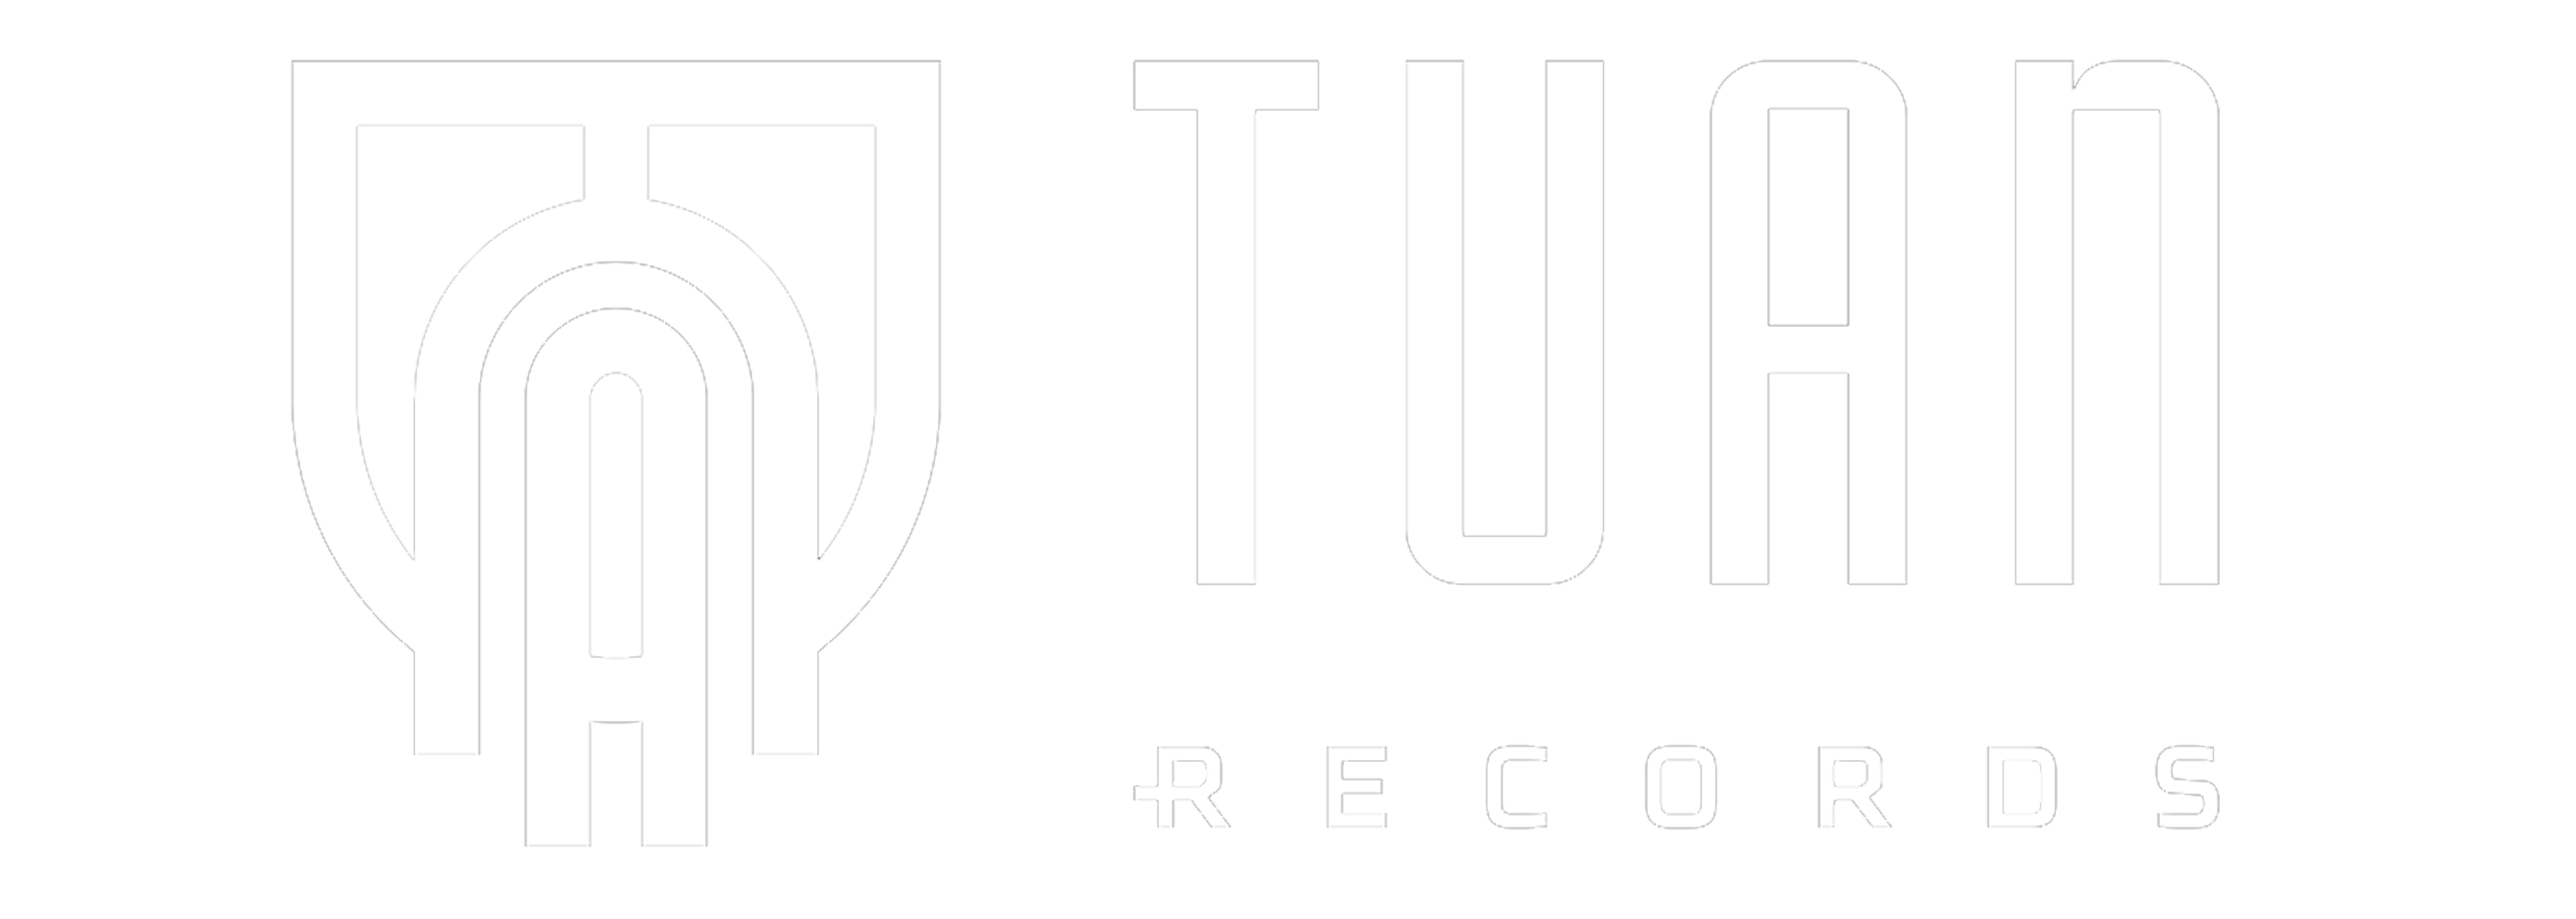 Tuan Records is a music production and record label operating in Bucharest, Romania, that specialises in the development of artists and bands for commercial release.